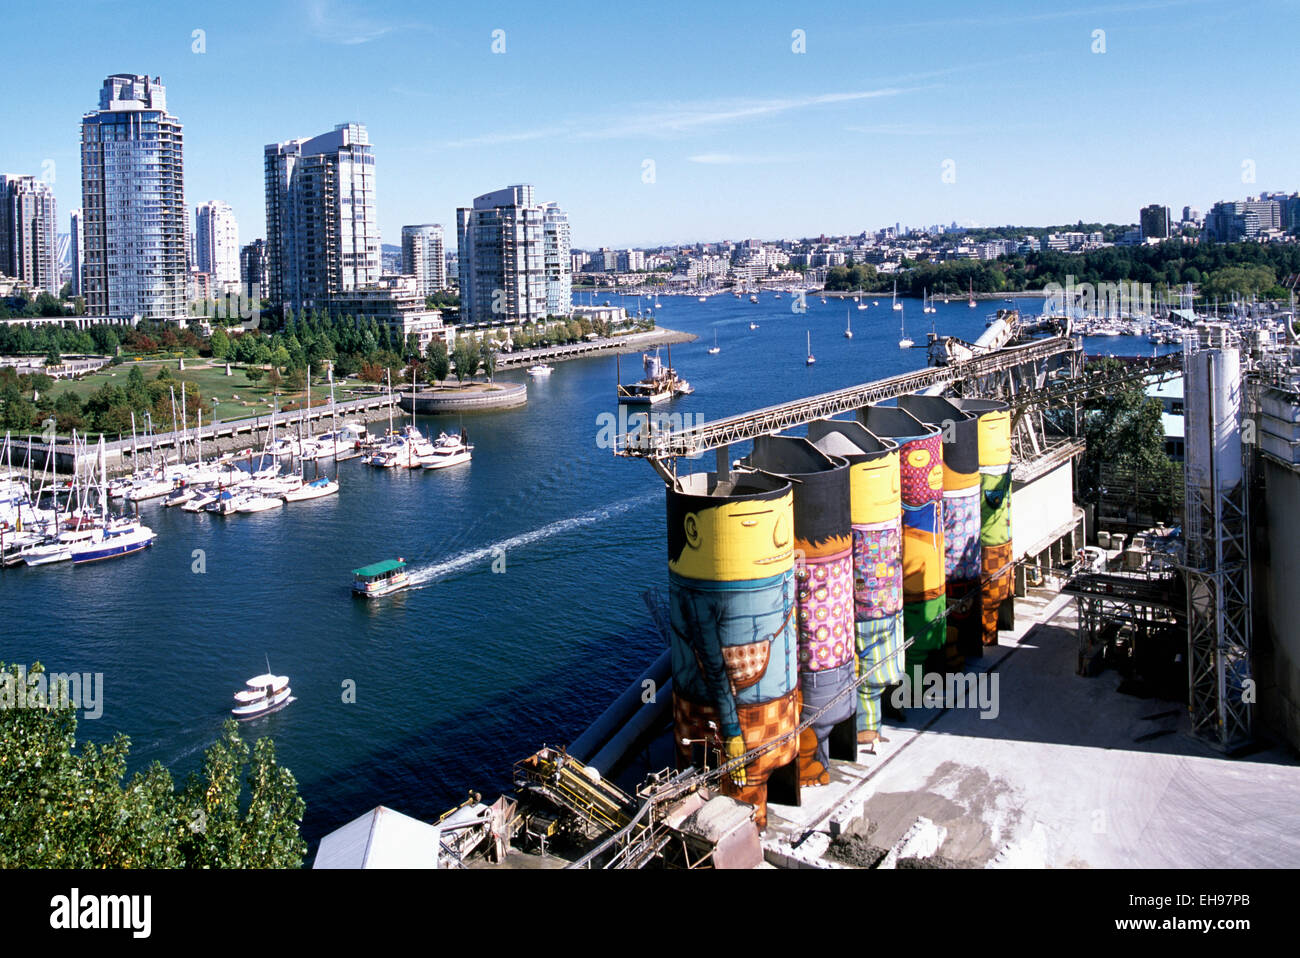 Overlooking False Creek and Granville Island, Vancouver, British Columbia, Canada - 'Giants' Public Art painted on Concrete Silo Stock Photo